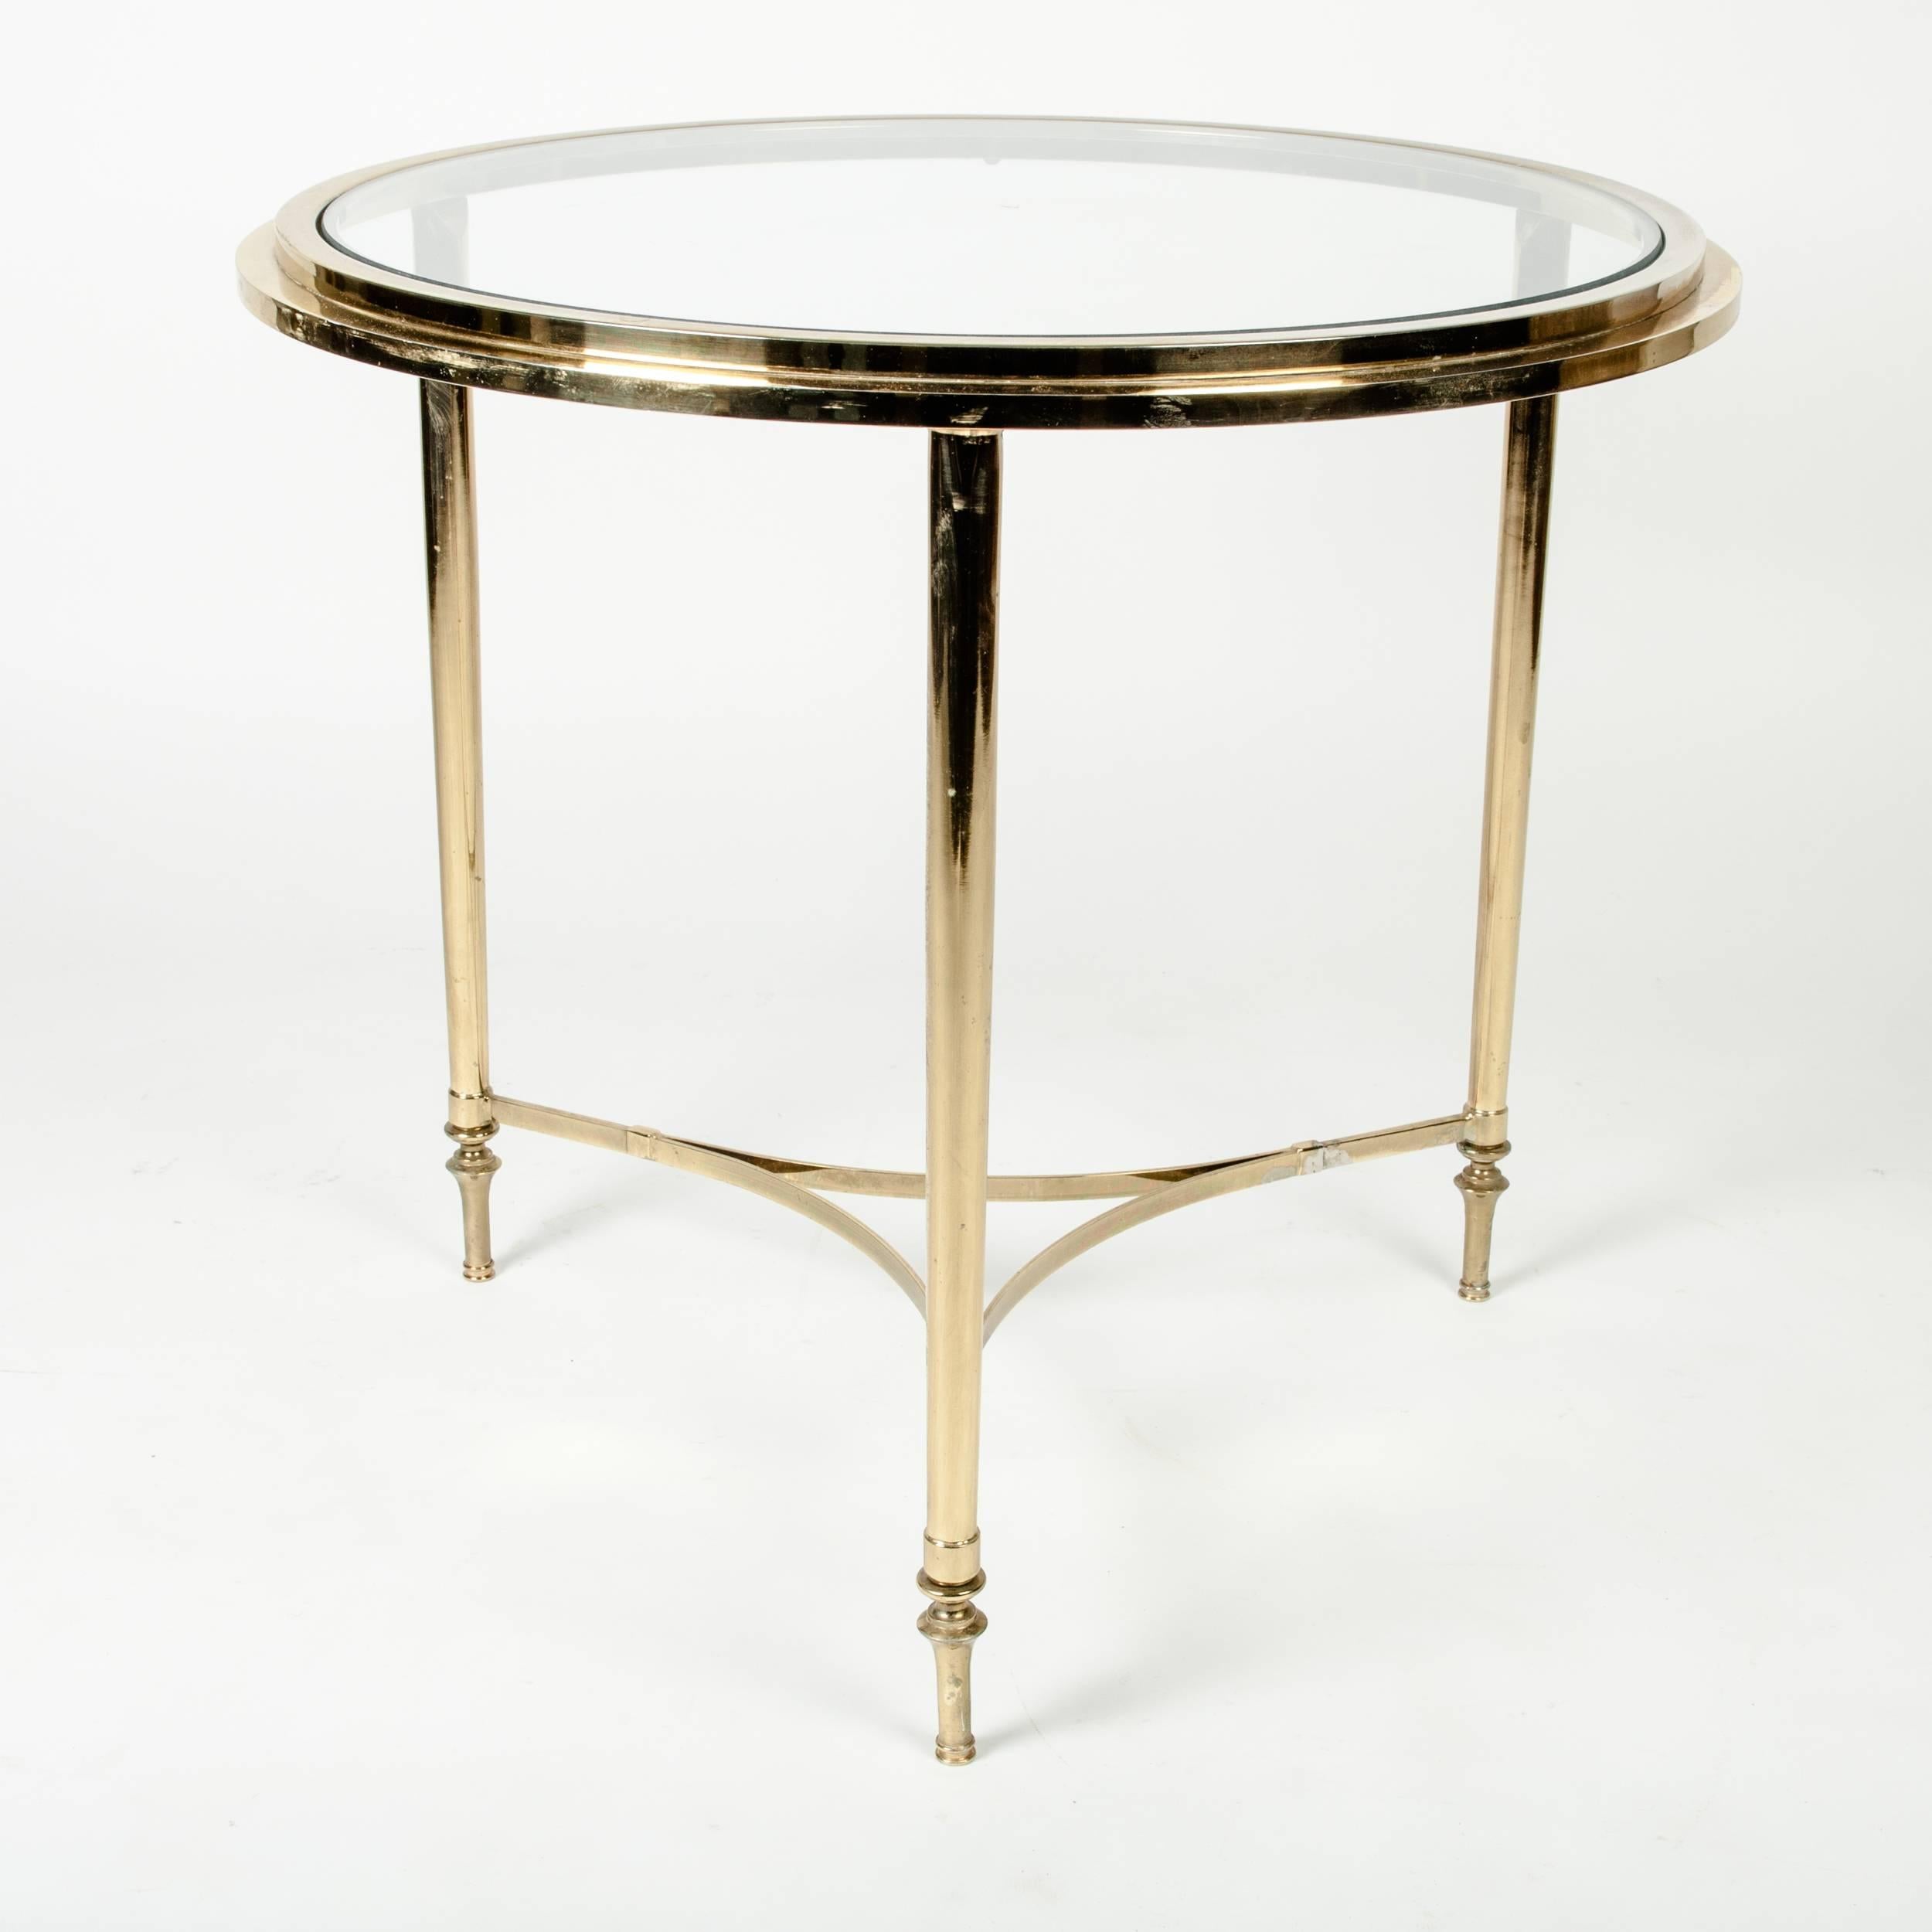 Vintage round solid brass side / end table with glass top. The table measure 22 inches high x 23 inches diameter.